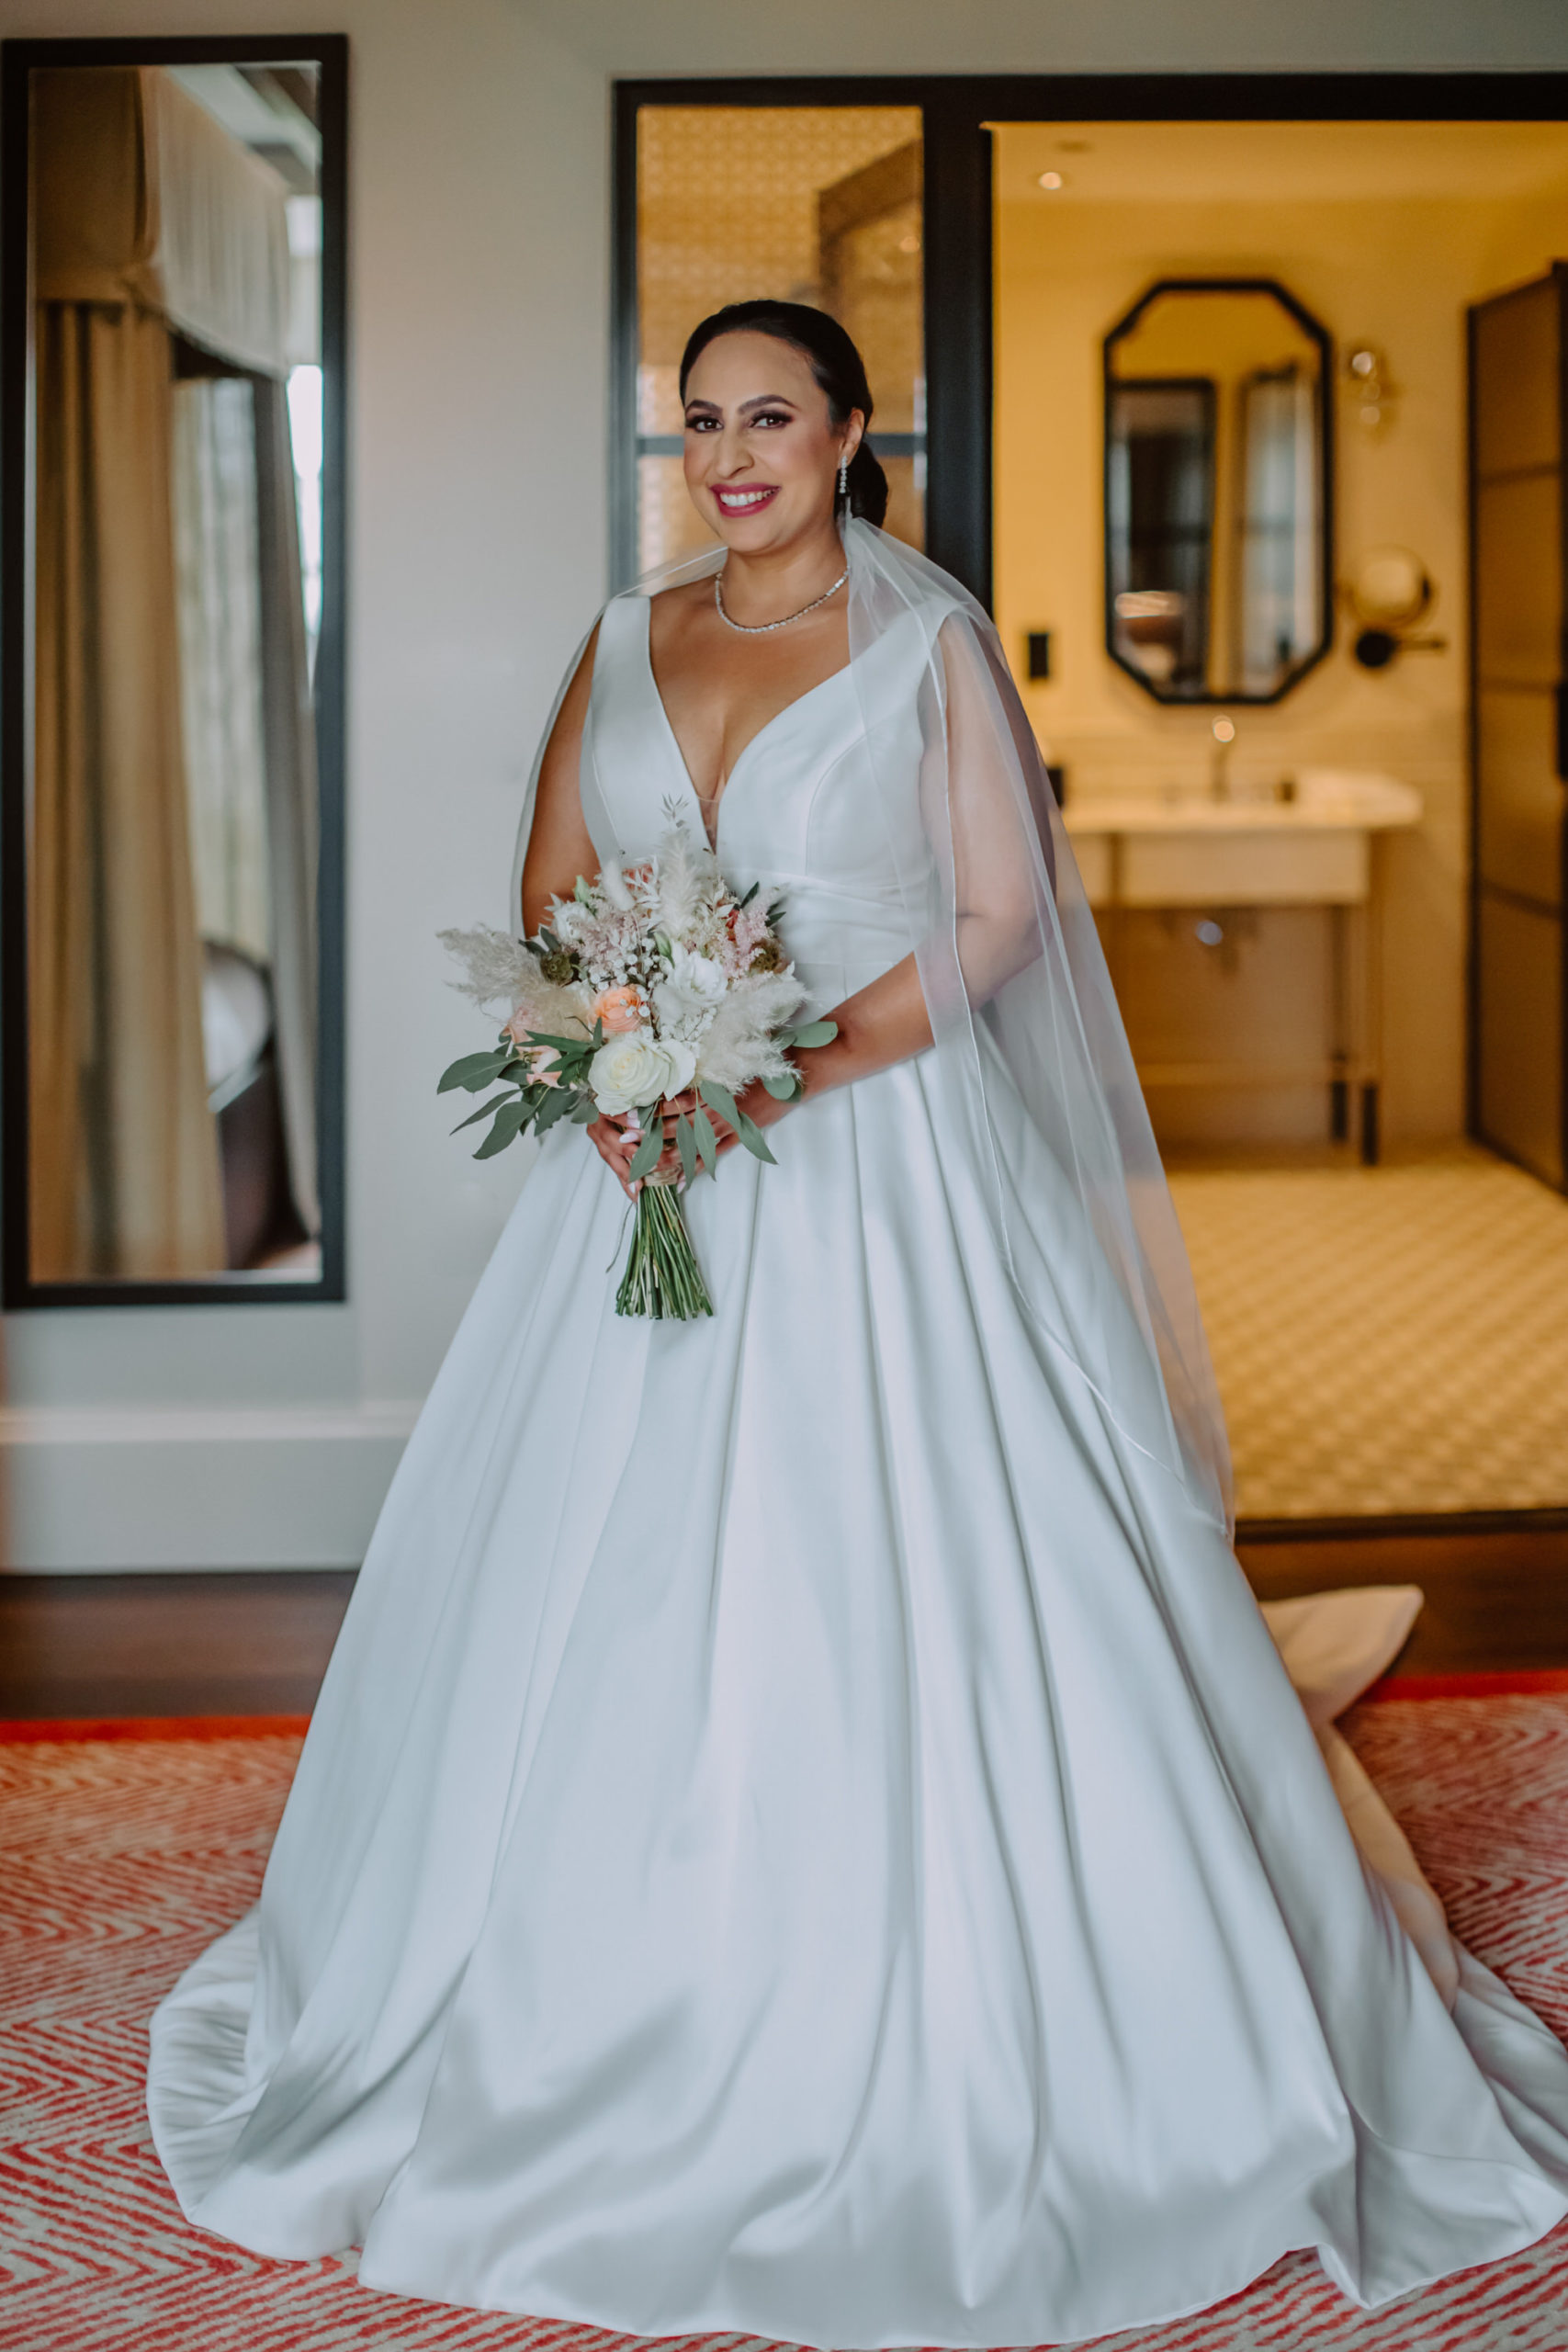 Bride smiling and looking into the camera in penthouse suite with beautiful bathroom in the background